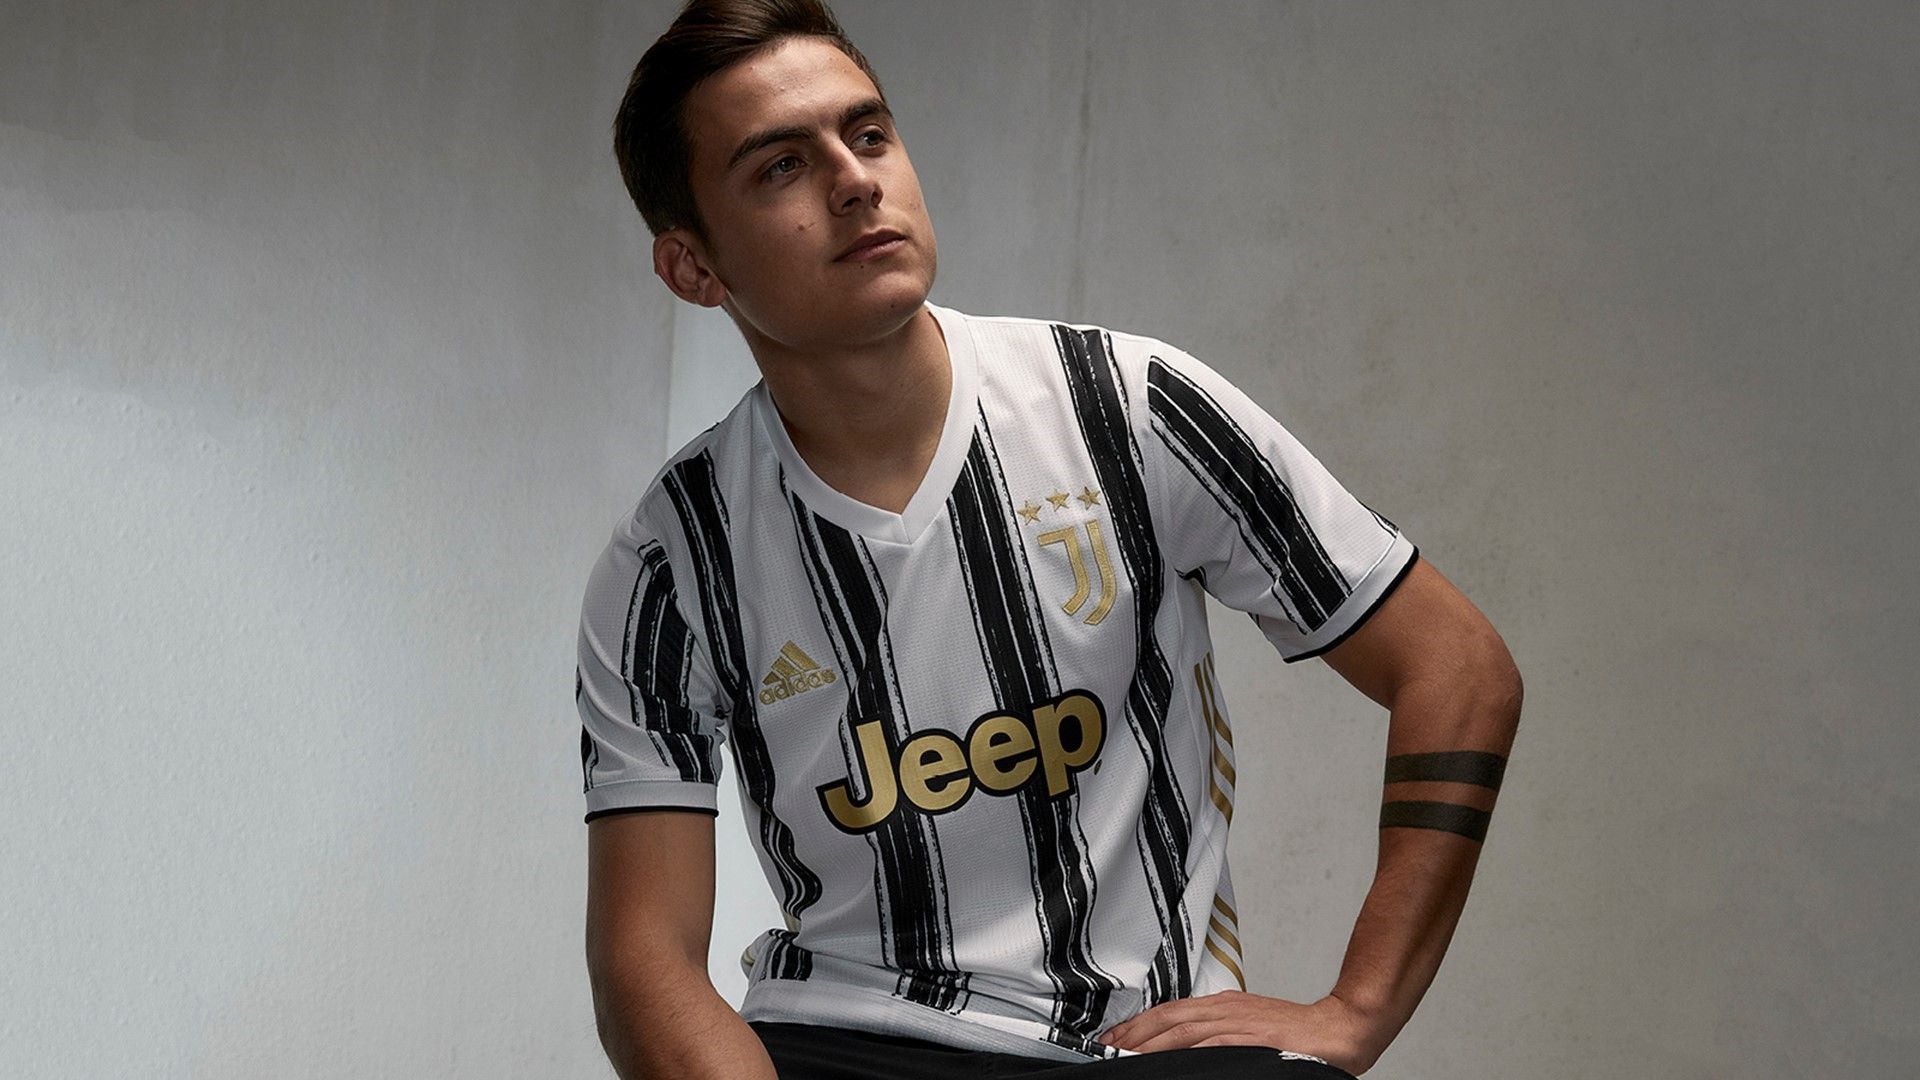 Revealing Juventus 2020 21 Home Jersey That Takes Inspiration From Contemporary Art To Reintroduce The Club's Iconic Stripes